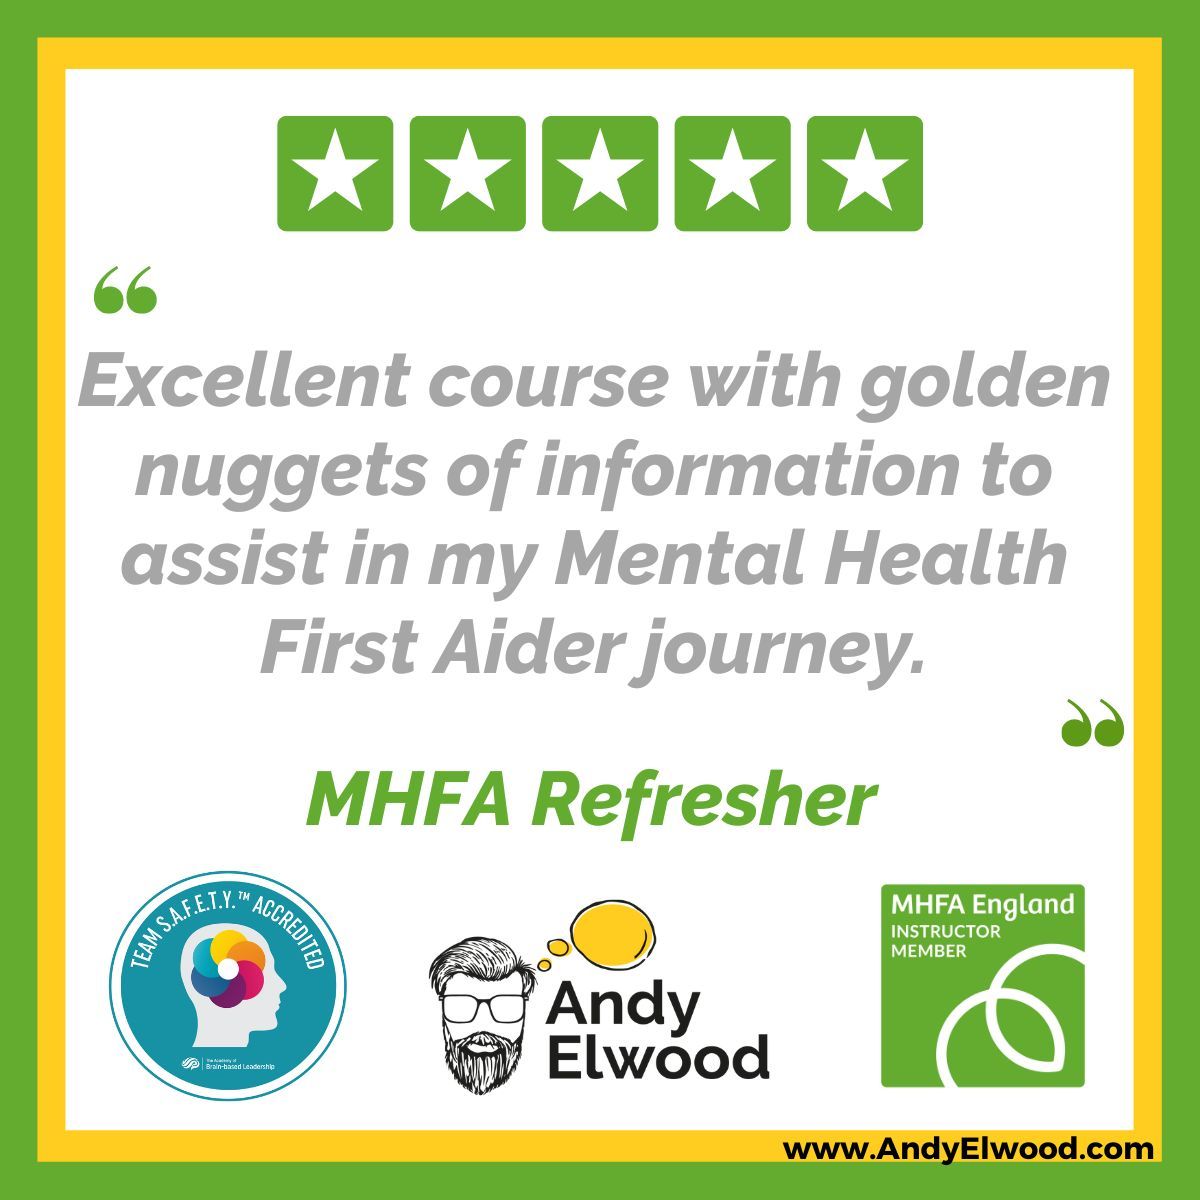 Your MHFAider® certificate expires after 3 years! My next online Refresher is on 26th April. Click through to my website for further course dates, whatever your MHFAider® needs. I also deliver: Mental Health Skills for Managers & Mental Health Awareness training #MHFA